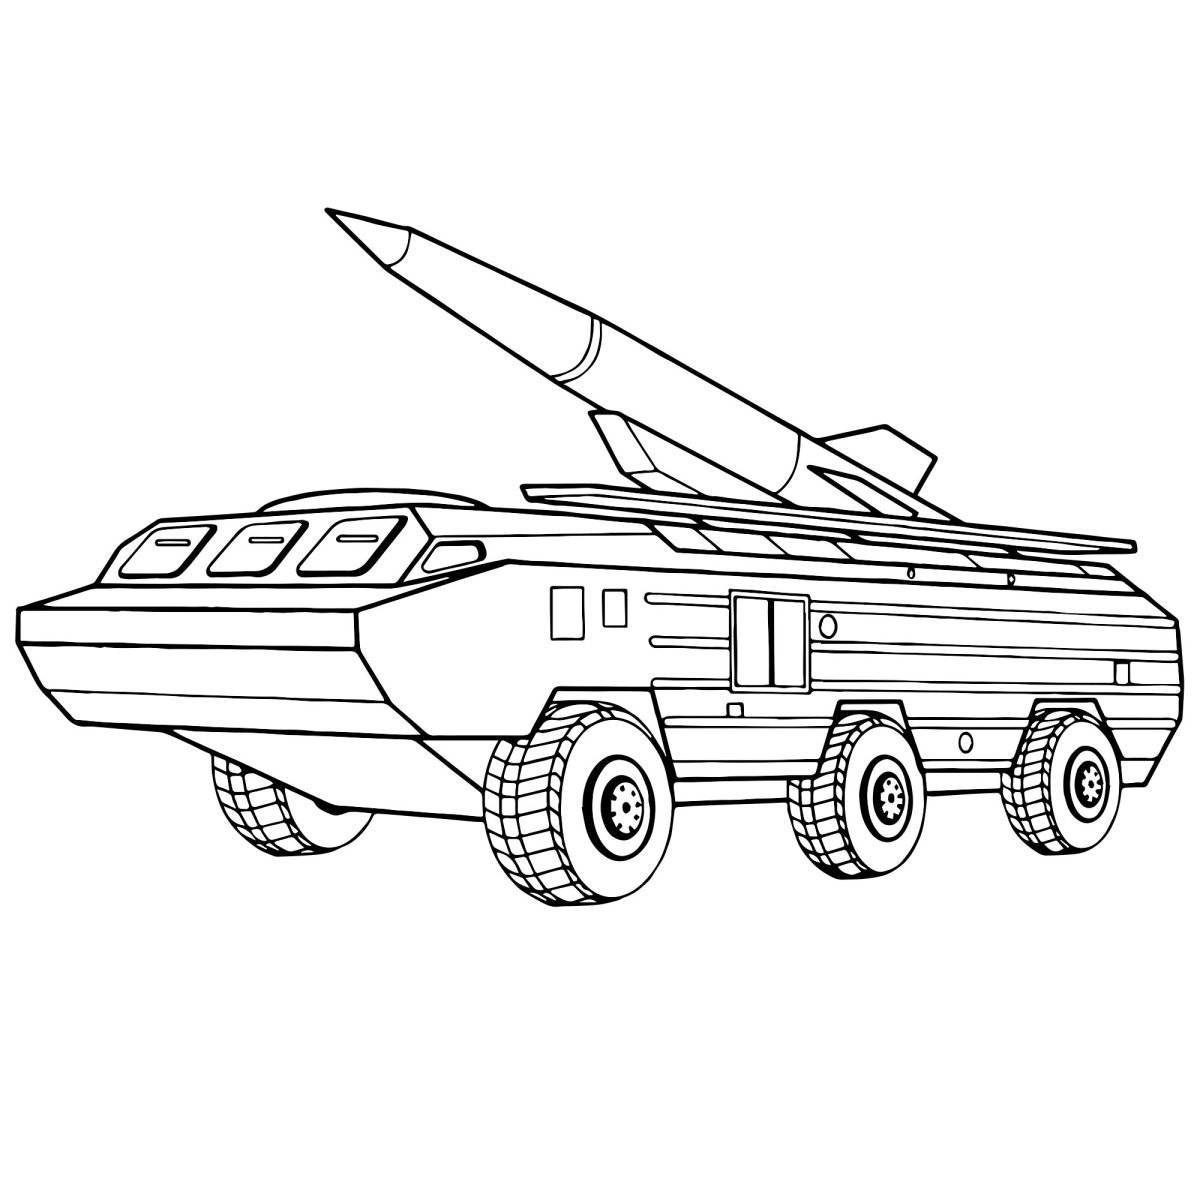 Playful military vehicles coloring page for boys